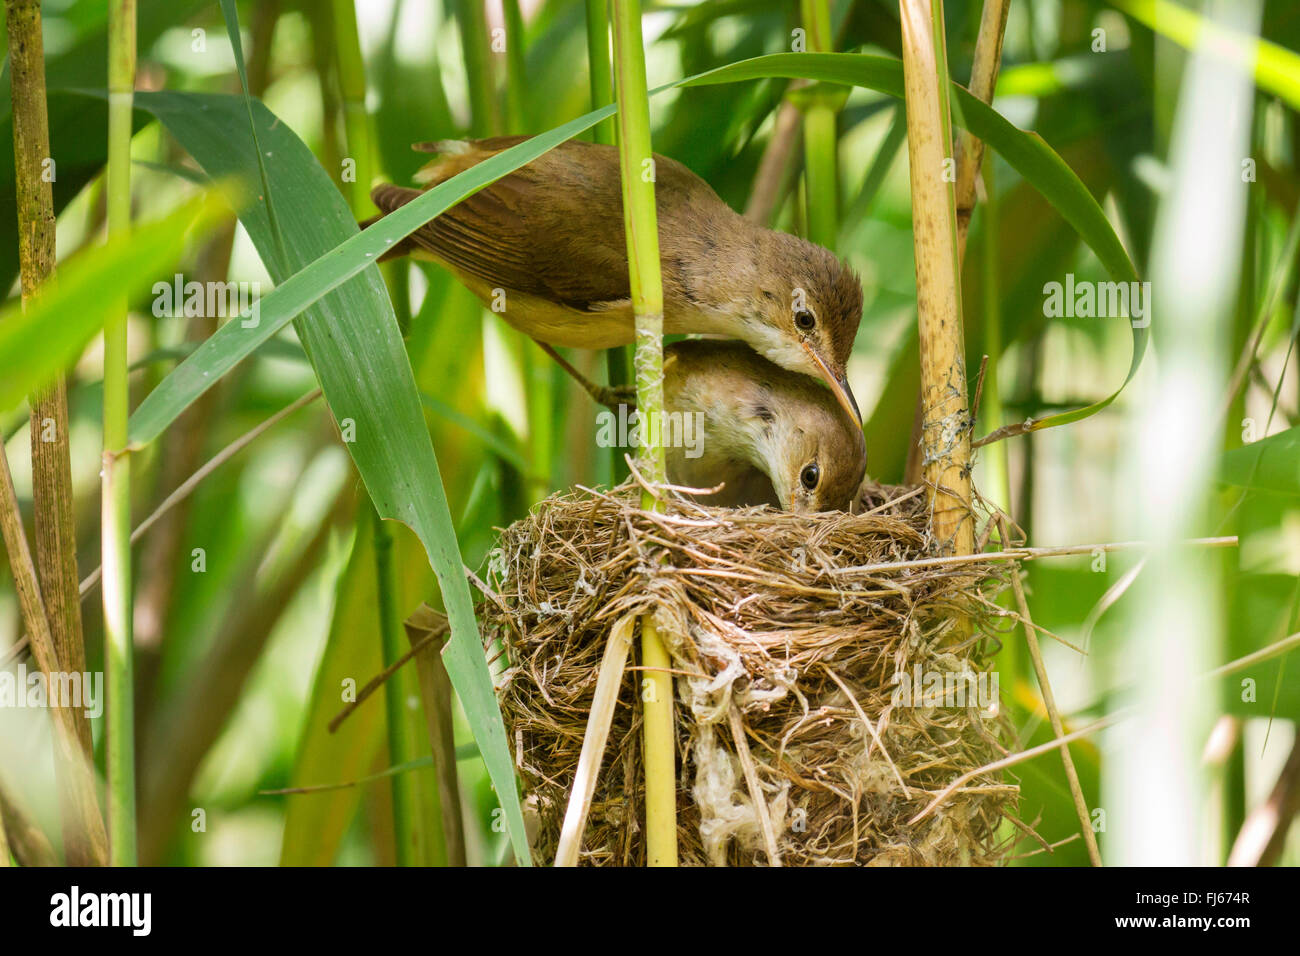 reed warbler (Acrocephalus scirpaceus), reed warblers looking at the young cuckoo in the nest, Germany, Bavaria, Oberbayern, Upper Bavaria Stock Photo